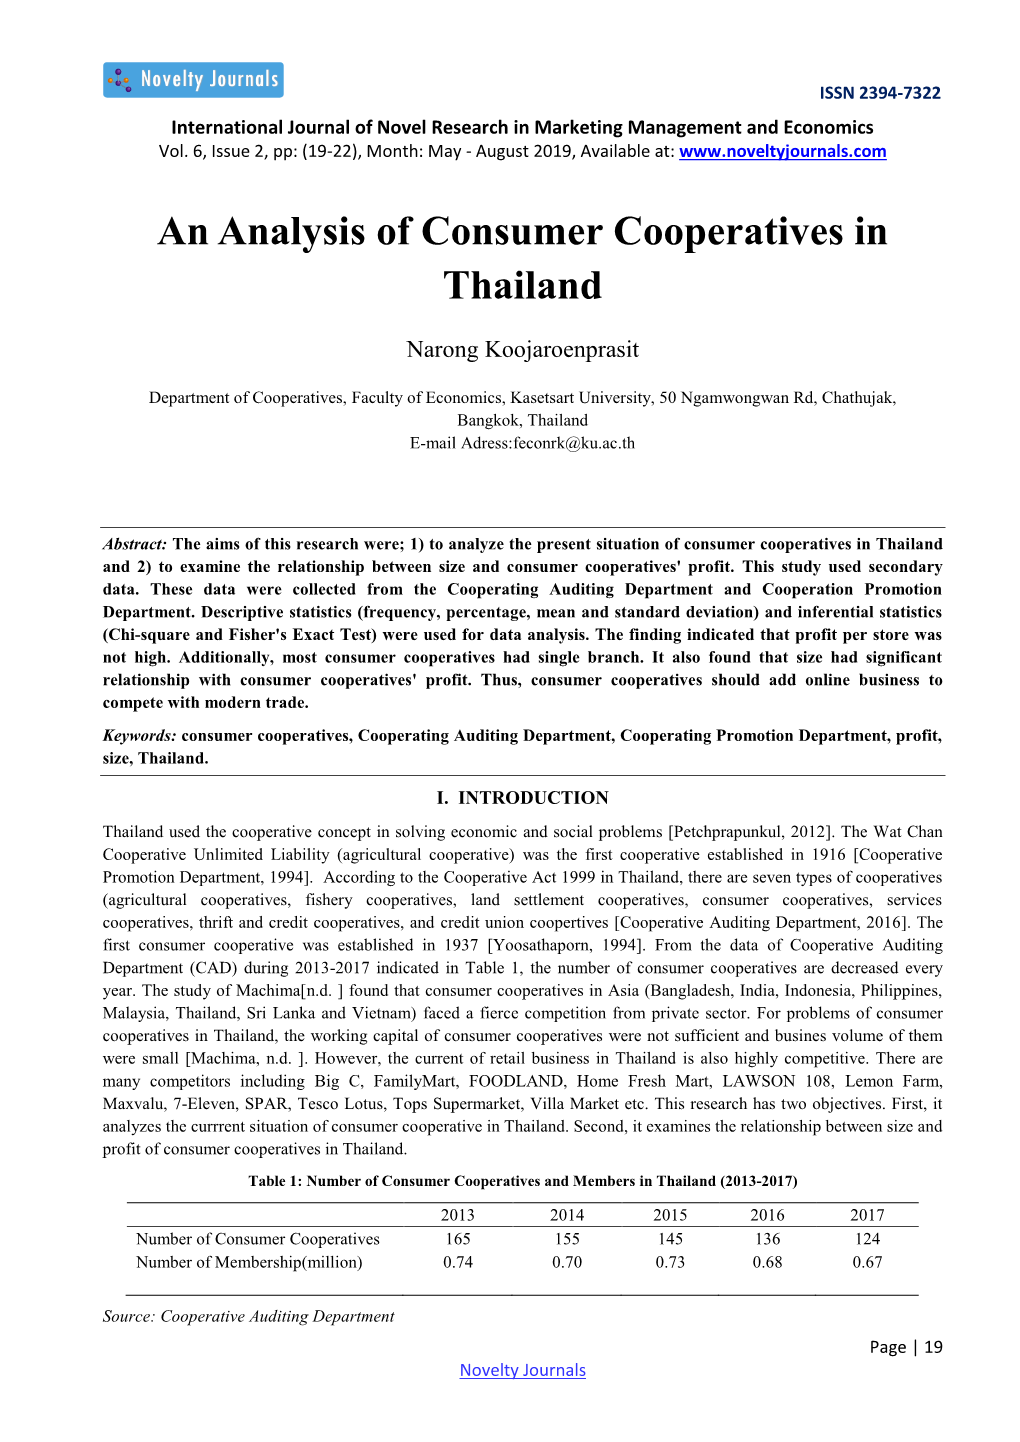 An Analysis of Consumer Cooperatives in Thailand